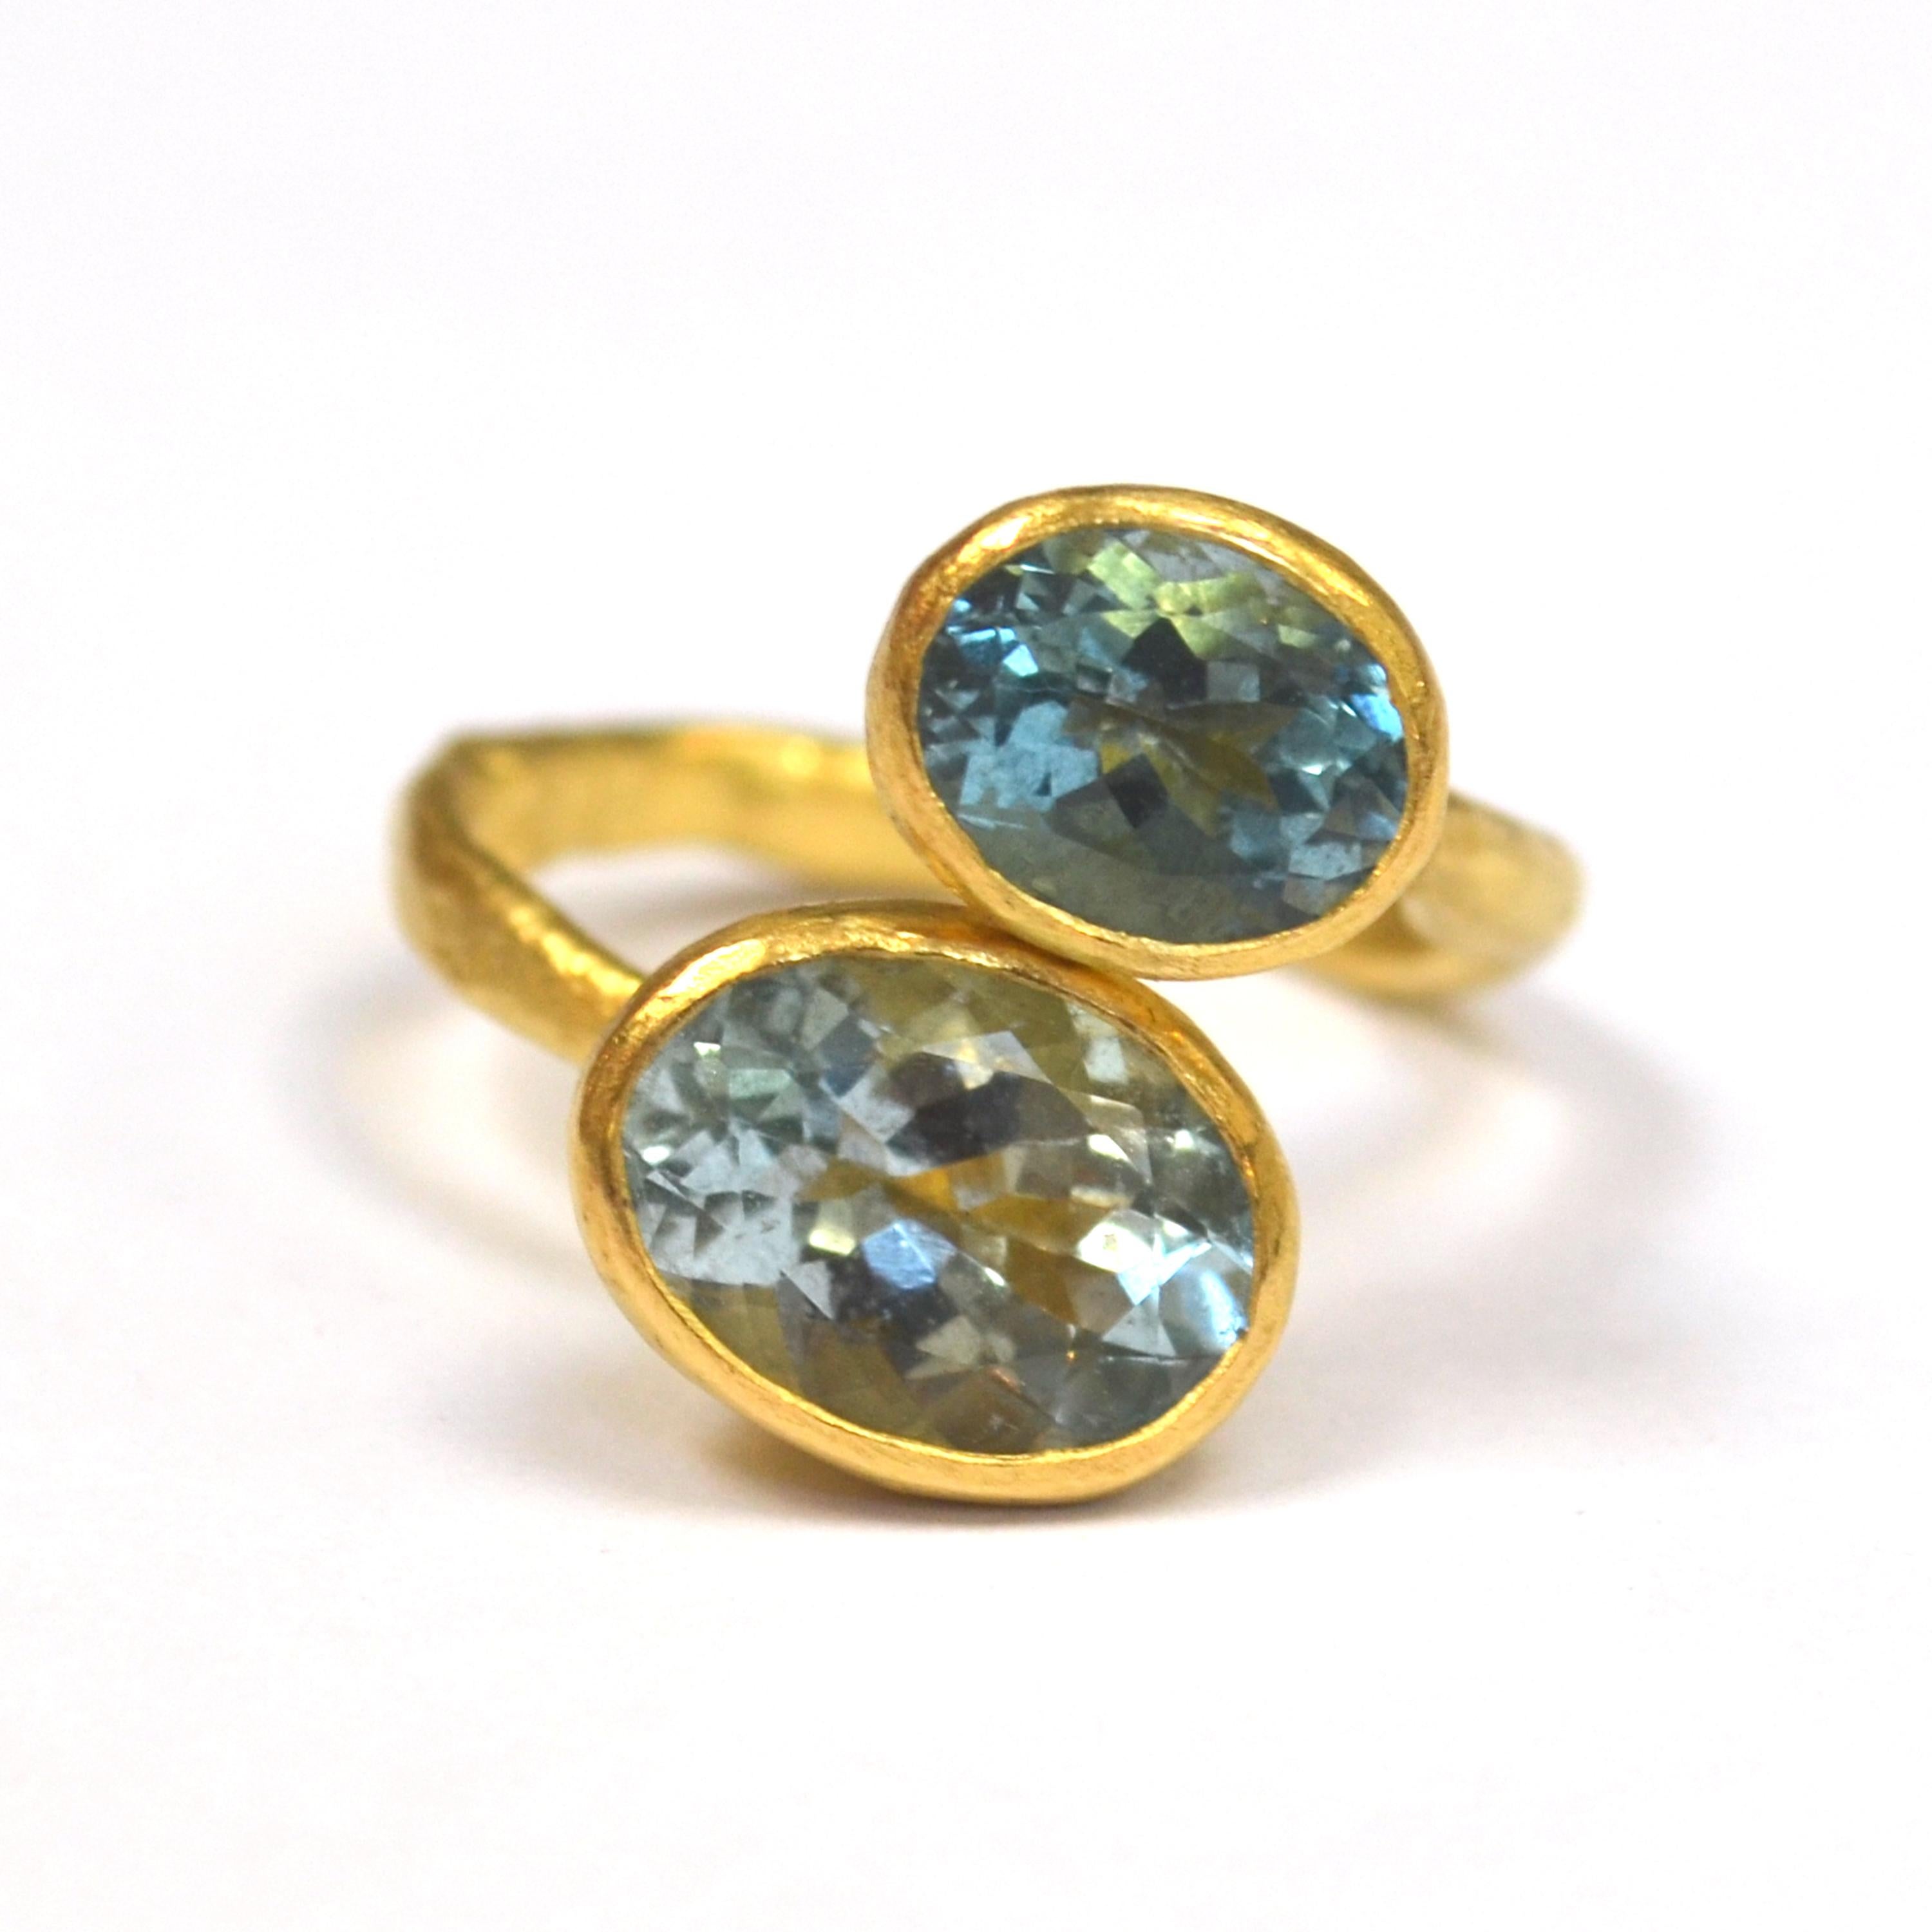 18k Gold organic textured handmade open ring. With two oval Aquamarines, 2 carats and 4 carats each. Each one has a slightly different tone of blue, one is bright and watery, the other a slightly darker blue, both with beautiful facets that create